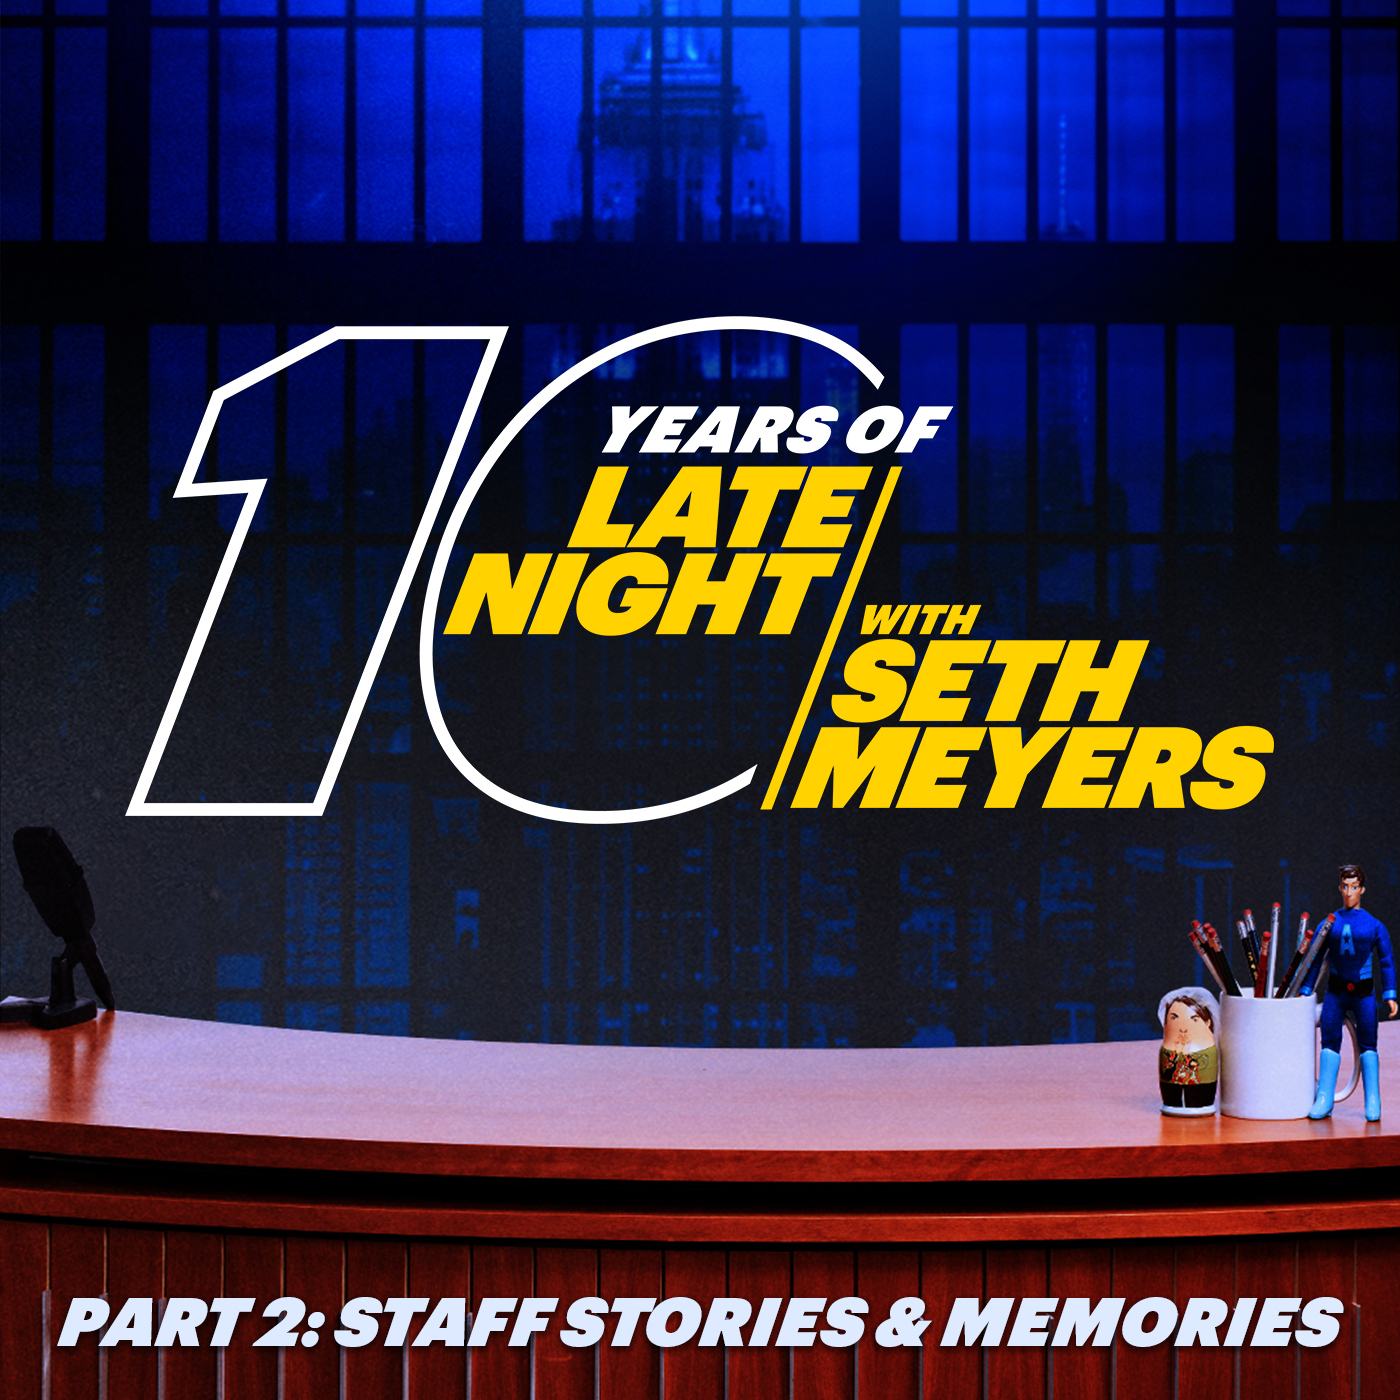 10 Years of Late Night with Seth Meyers, Part 2: Staff Stories & Memories